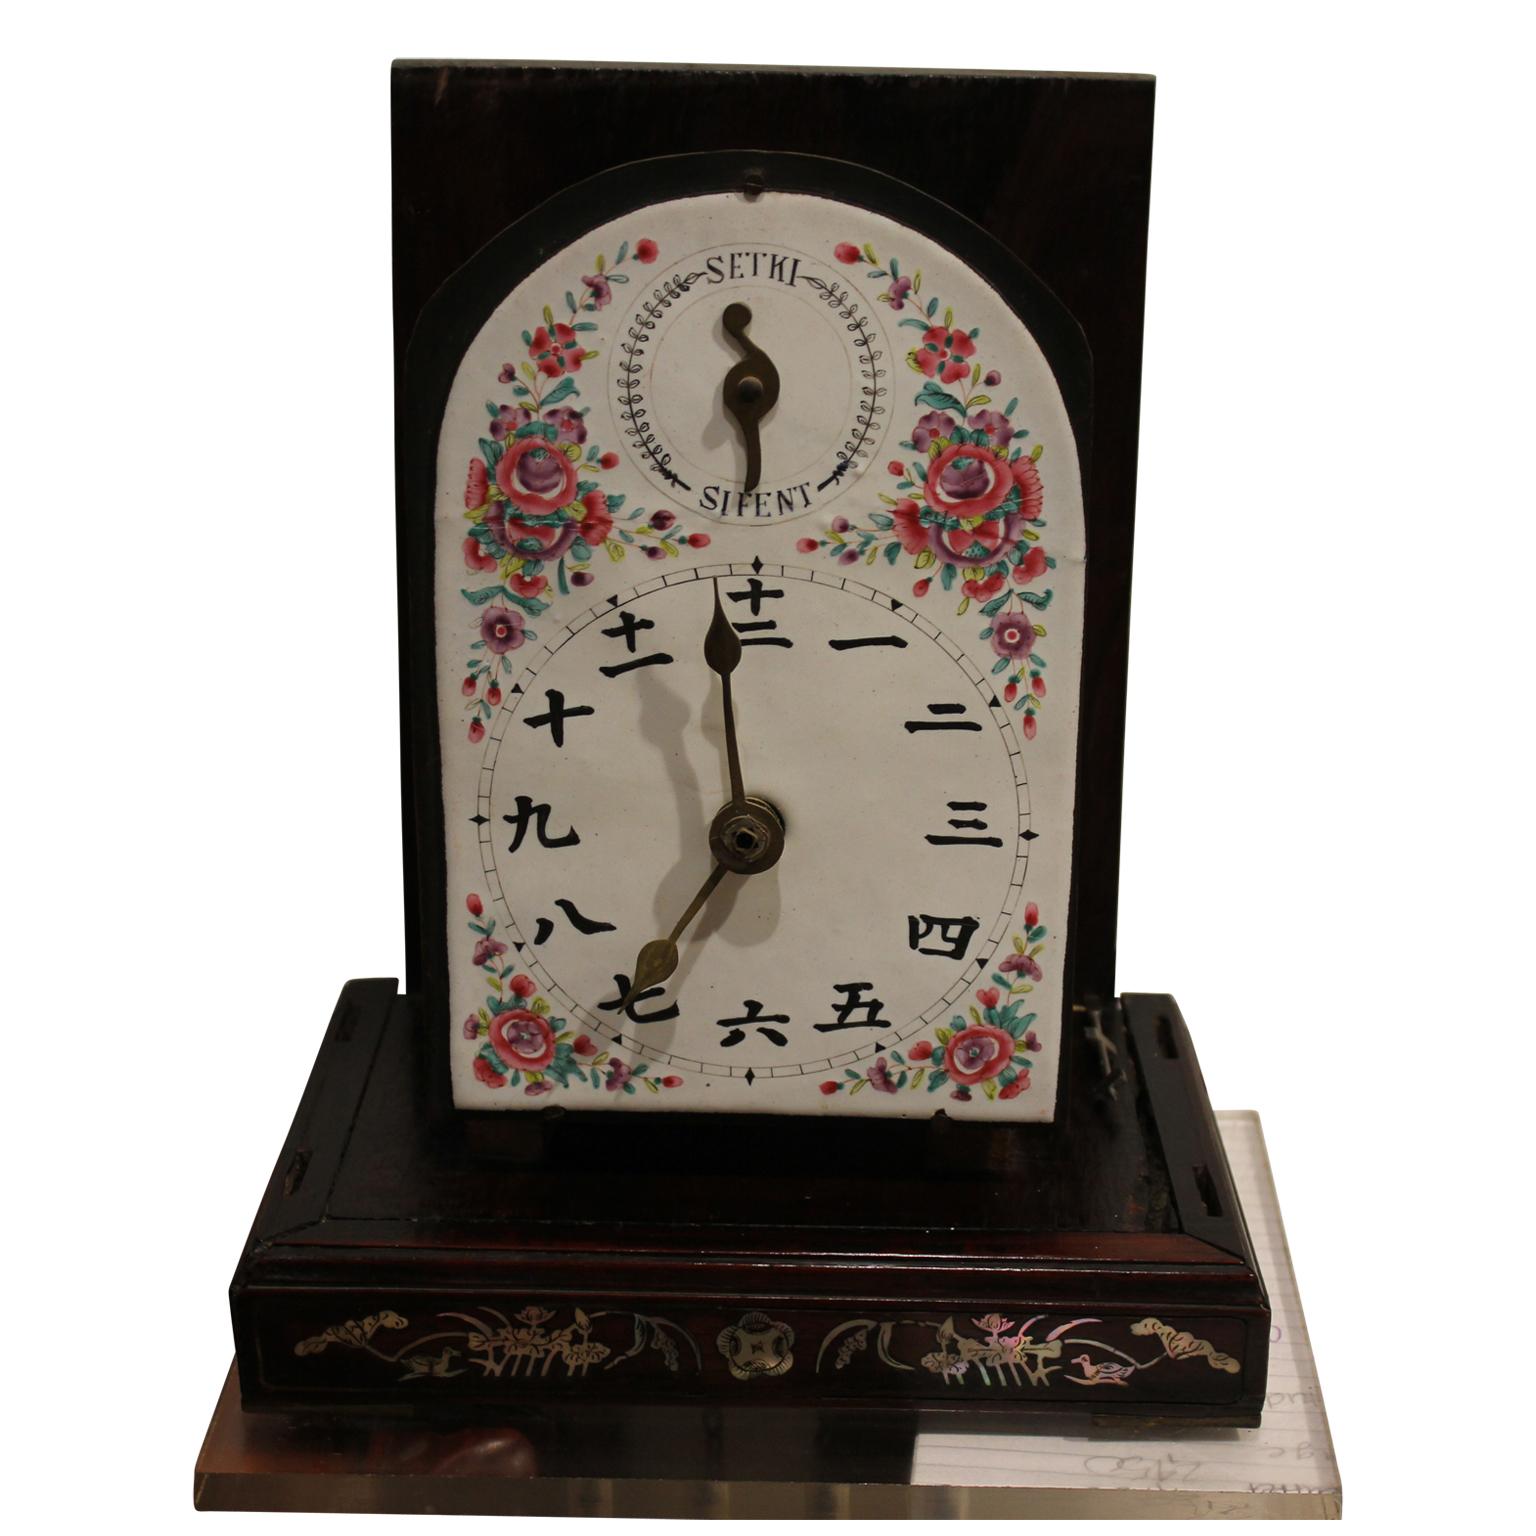 Inlay Japanese style clock. The clock has a Porcelain face that is hand painted with flowers. Flowers and birds are inlaid in the wood. There are glass panes and a glass door that opens up to reveal the face. The top of the clock comes off to reveal